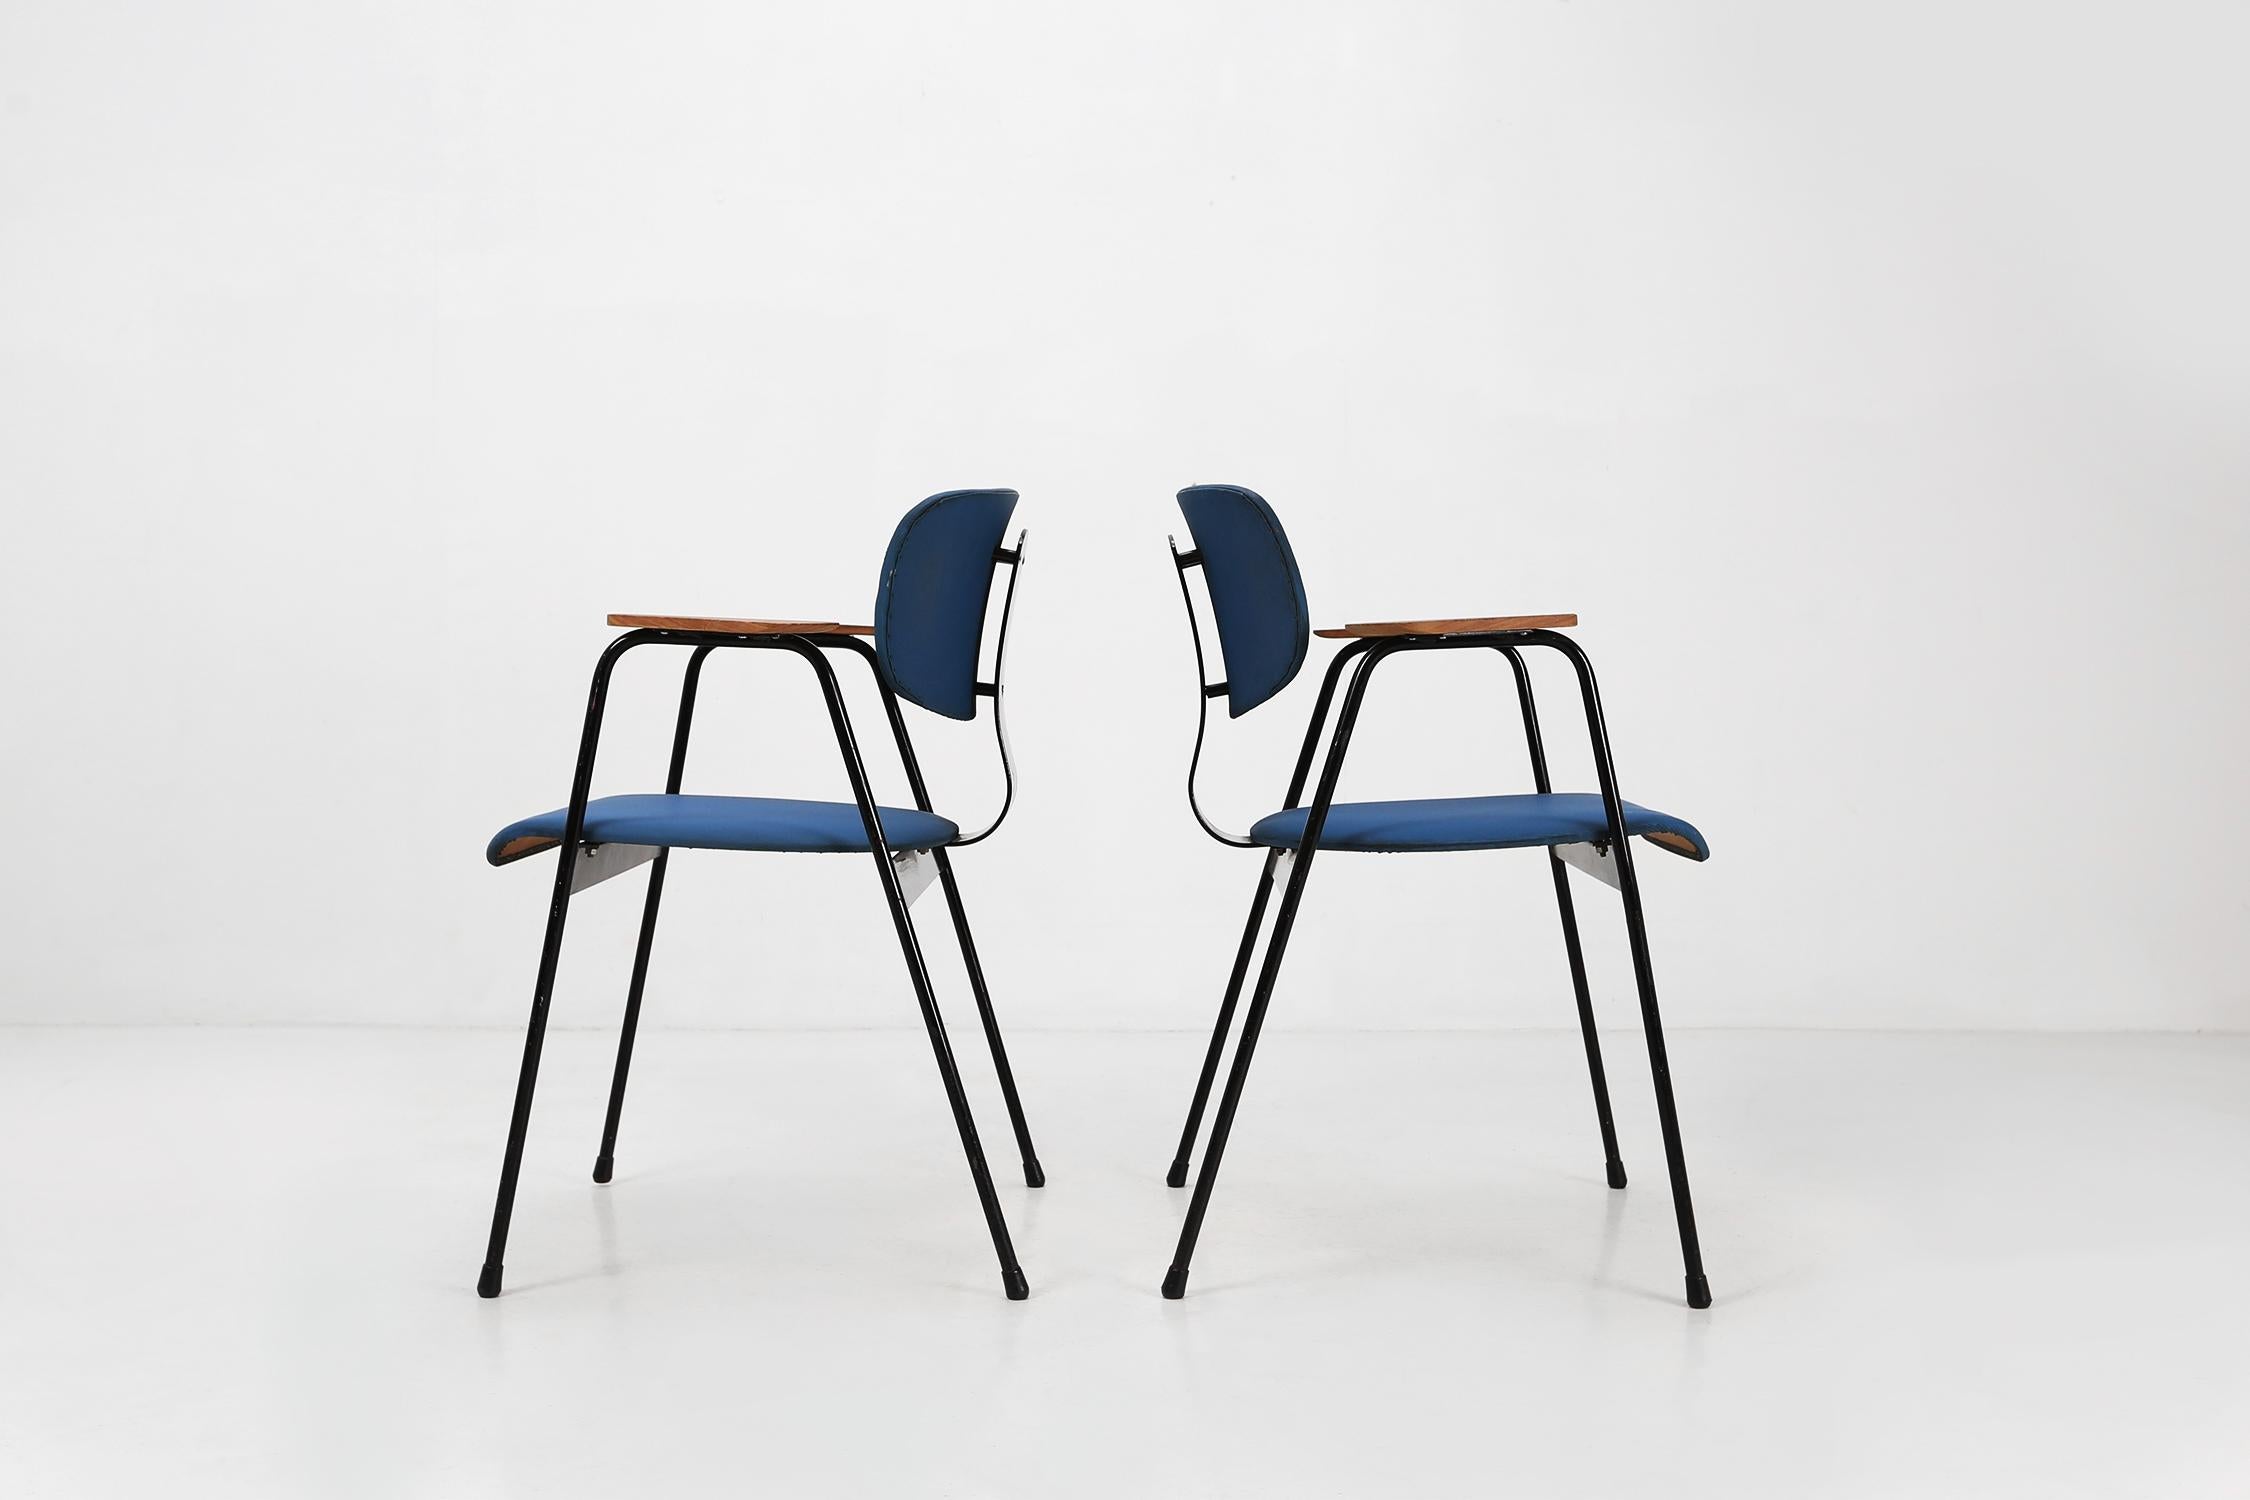 Two chairs by designer Willy Van Der Meeren for Tubax Ca.1950.
Have a black lacquered metal frame with blue vinyl seat.
The armrests are made of wood.

Van Der Meeren is considered one of the most important Belgian furniture designers of the